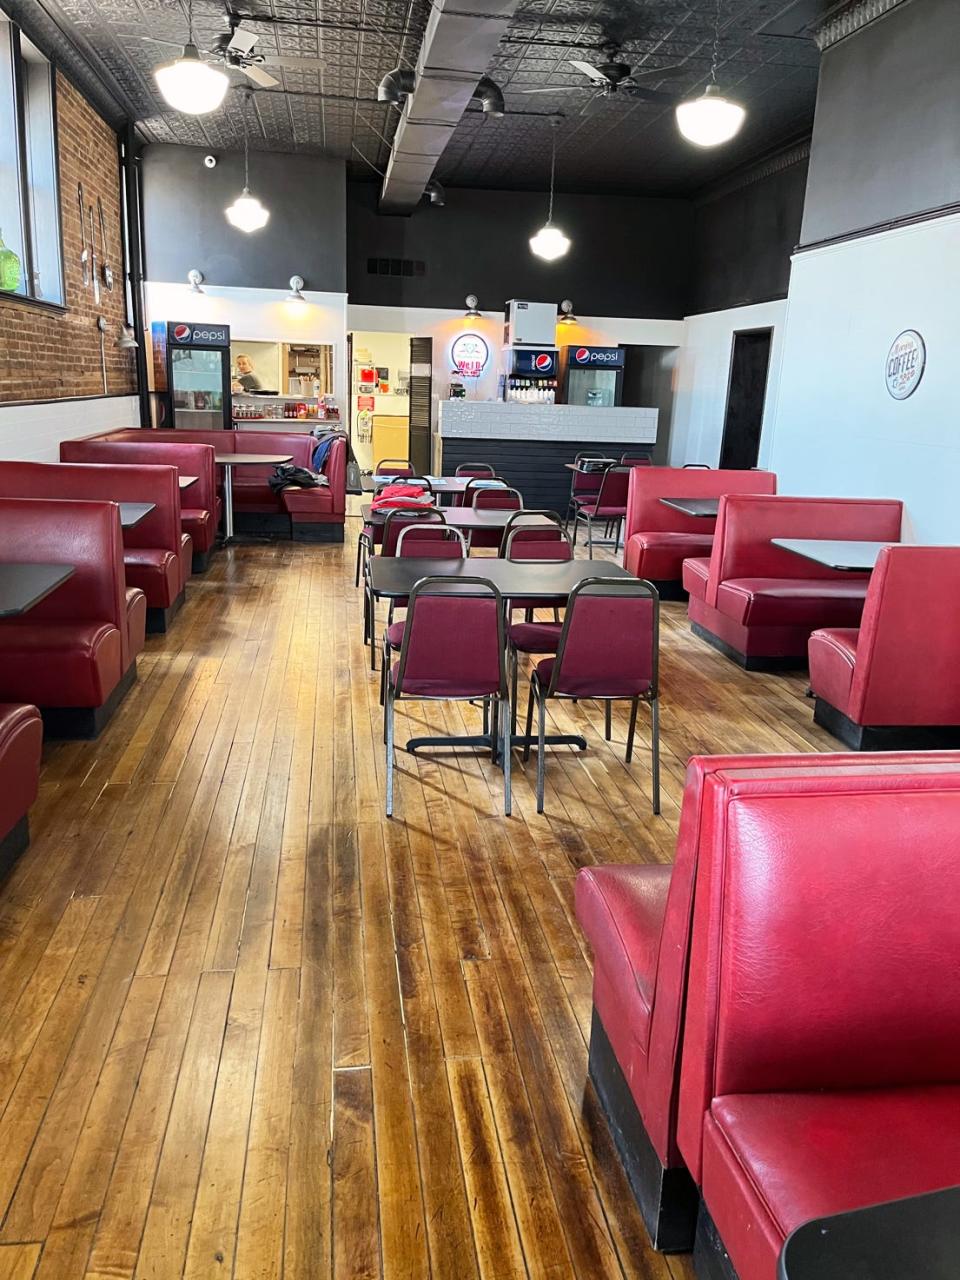 The Grill on Market Street in Colchester offers daily specials, burgers, fries, homemade tenderloins, spaghetti, horsehoes and pizza at night. They have a liquor license for beer and wine.